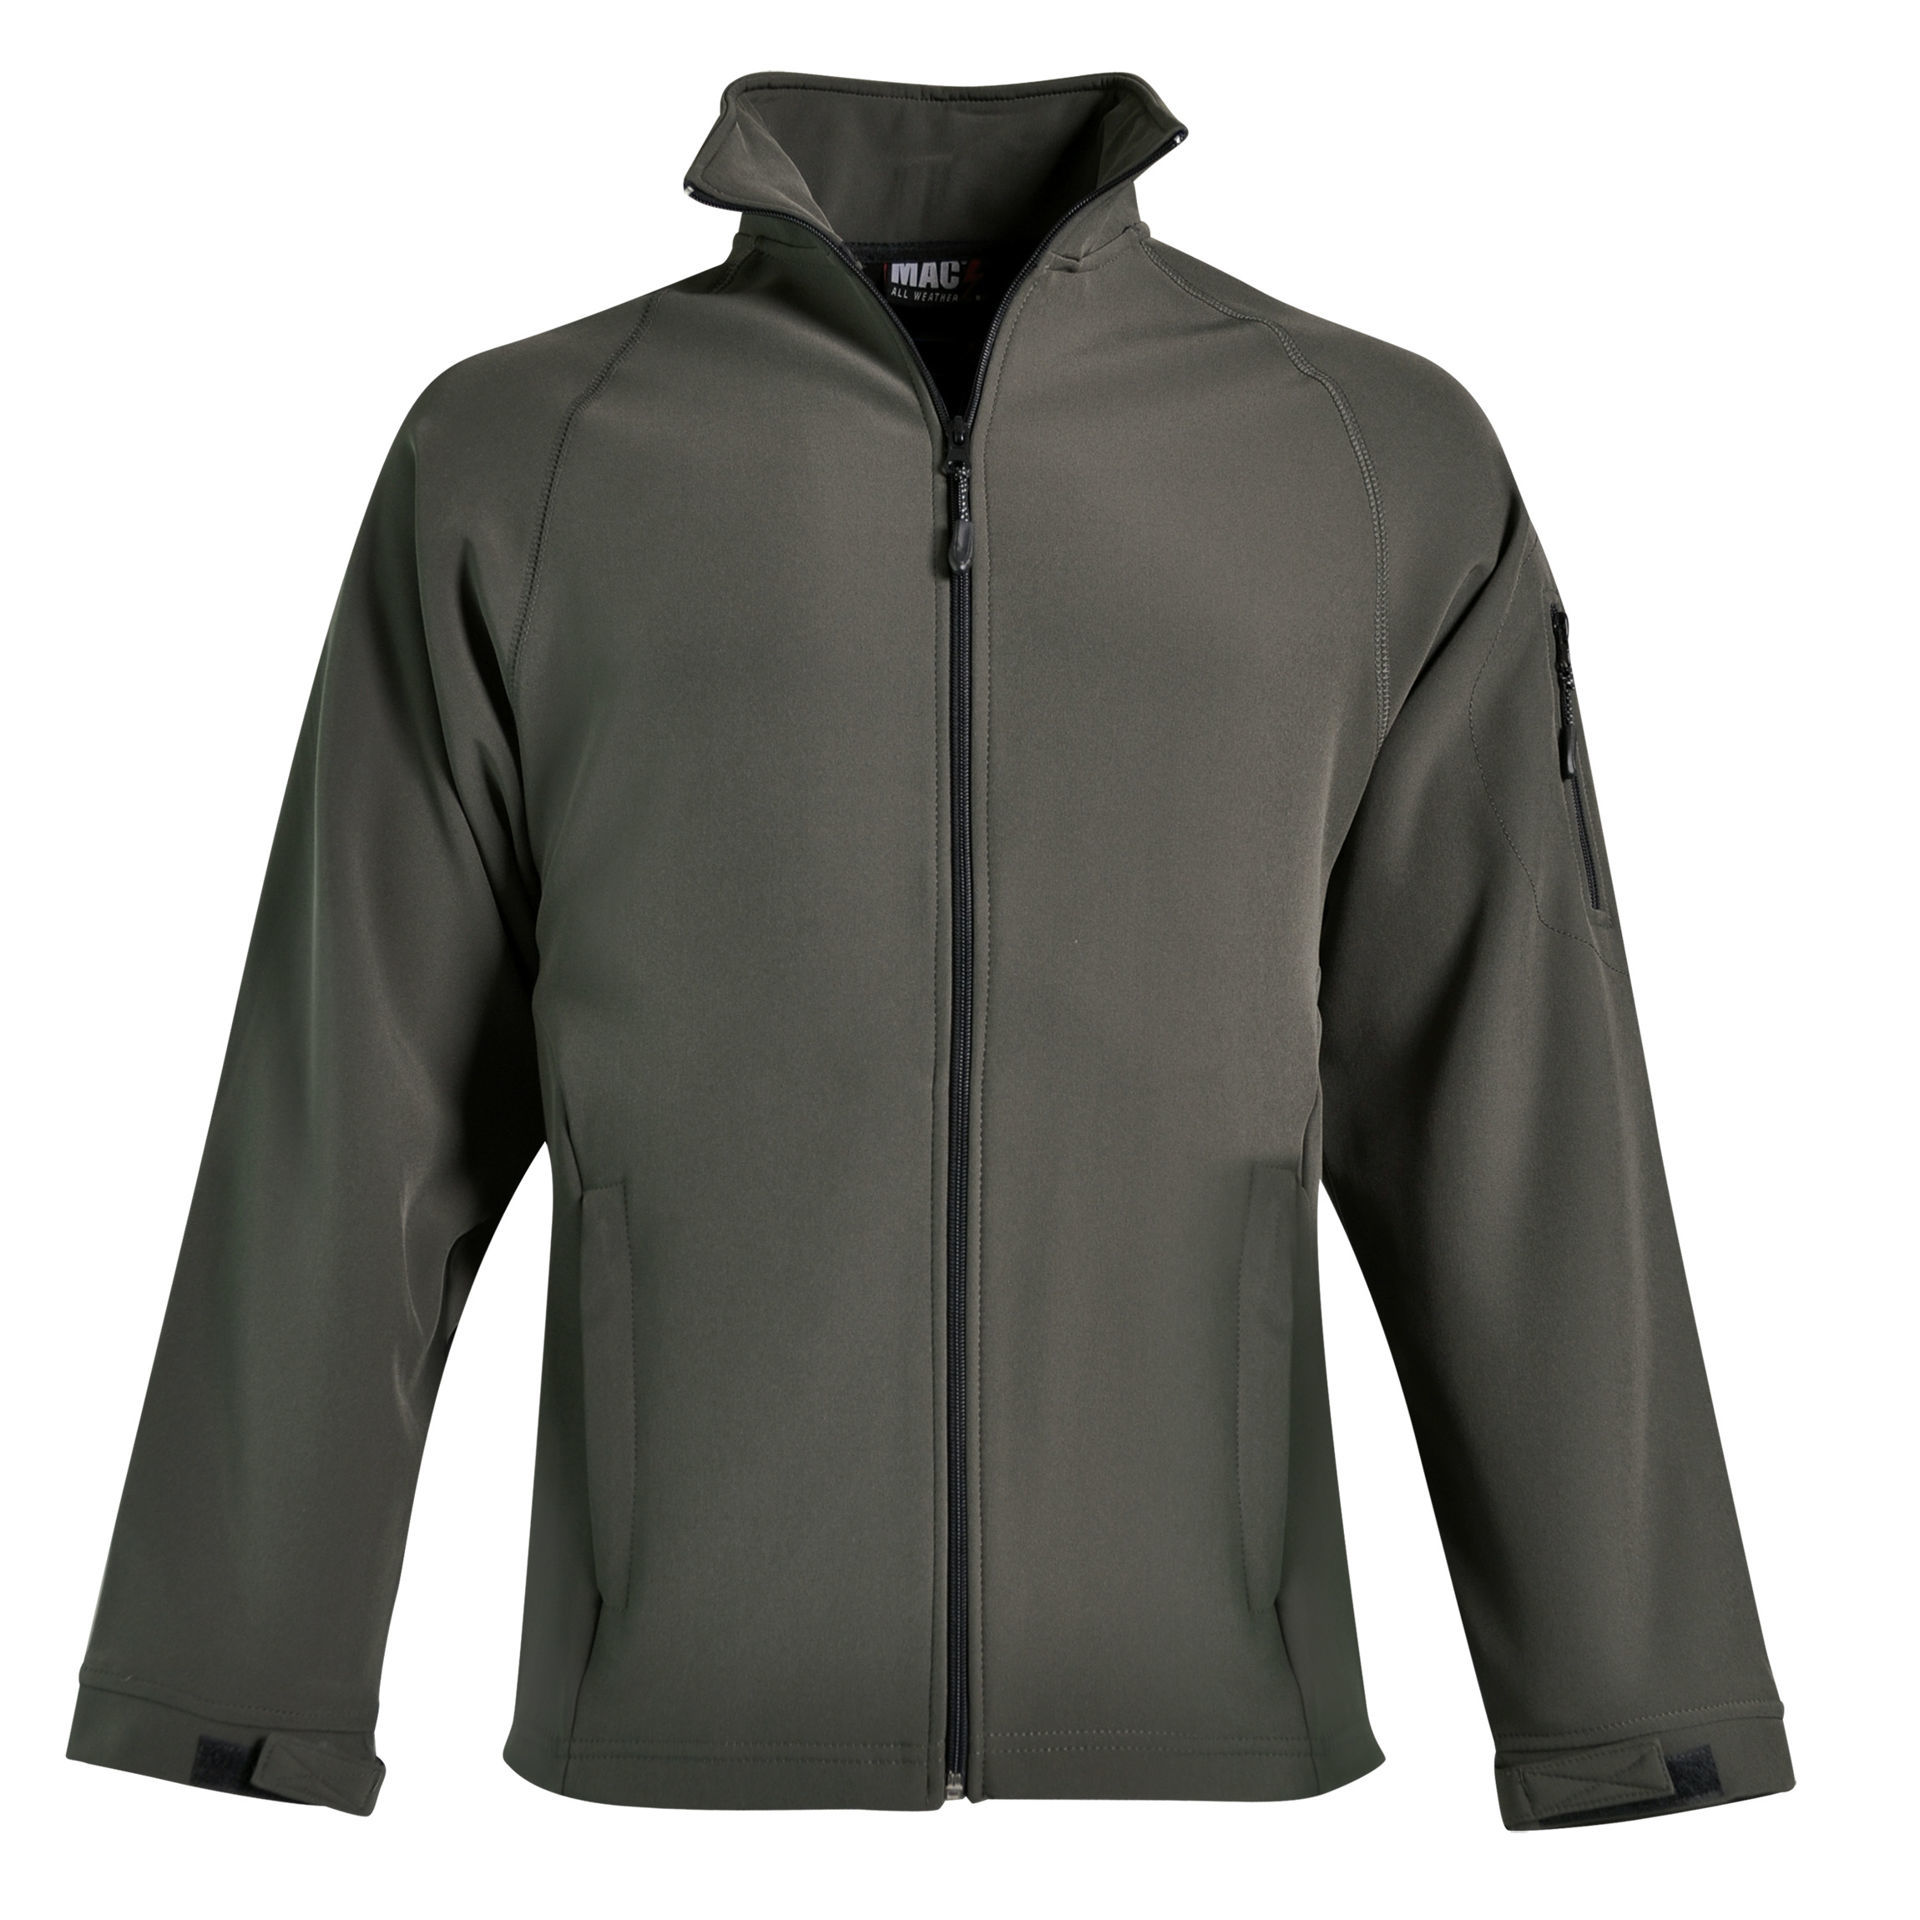 The Brand Factor - Classic Softshell Jacket